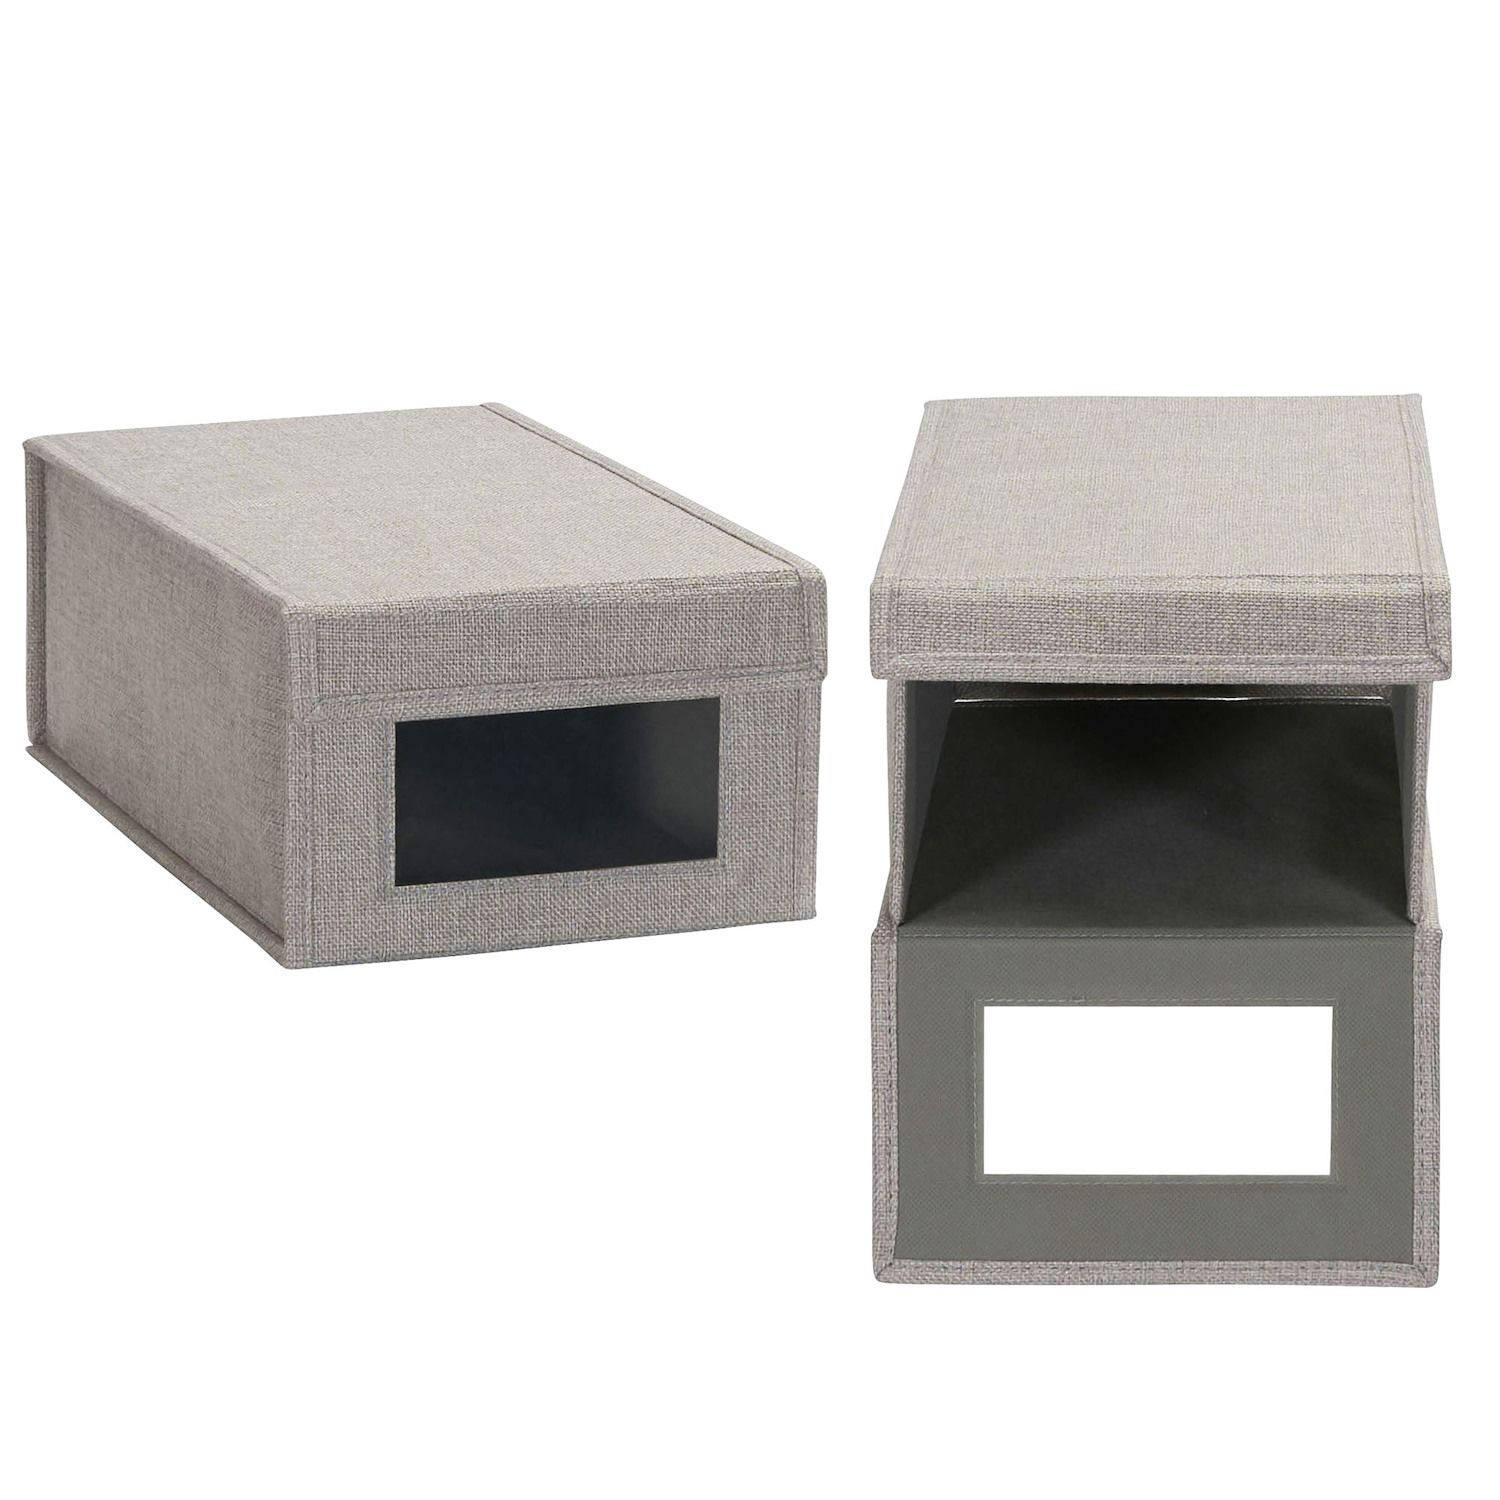 Image for Household Essentials Small Drop-Front Shoe Box 2-pack Set at Kohl's.